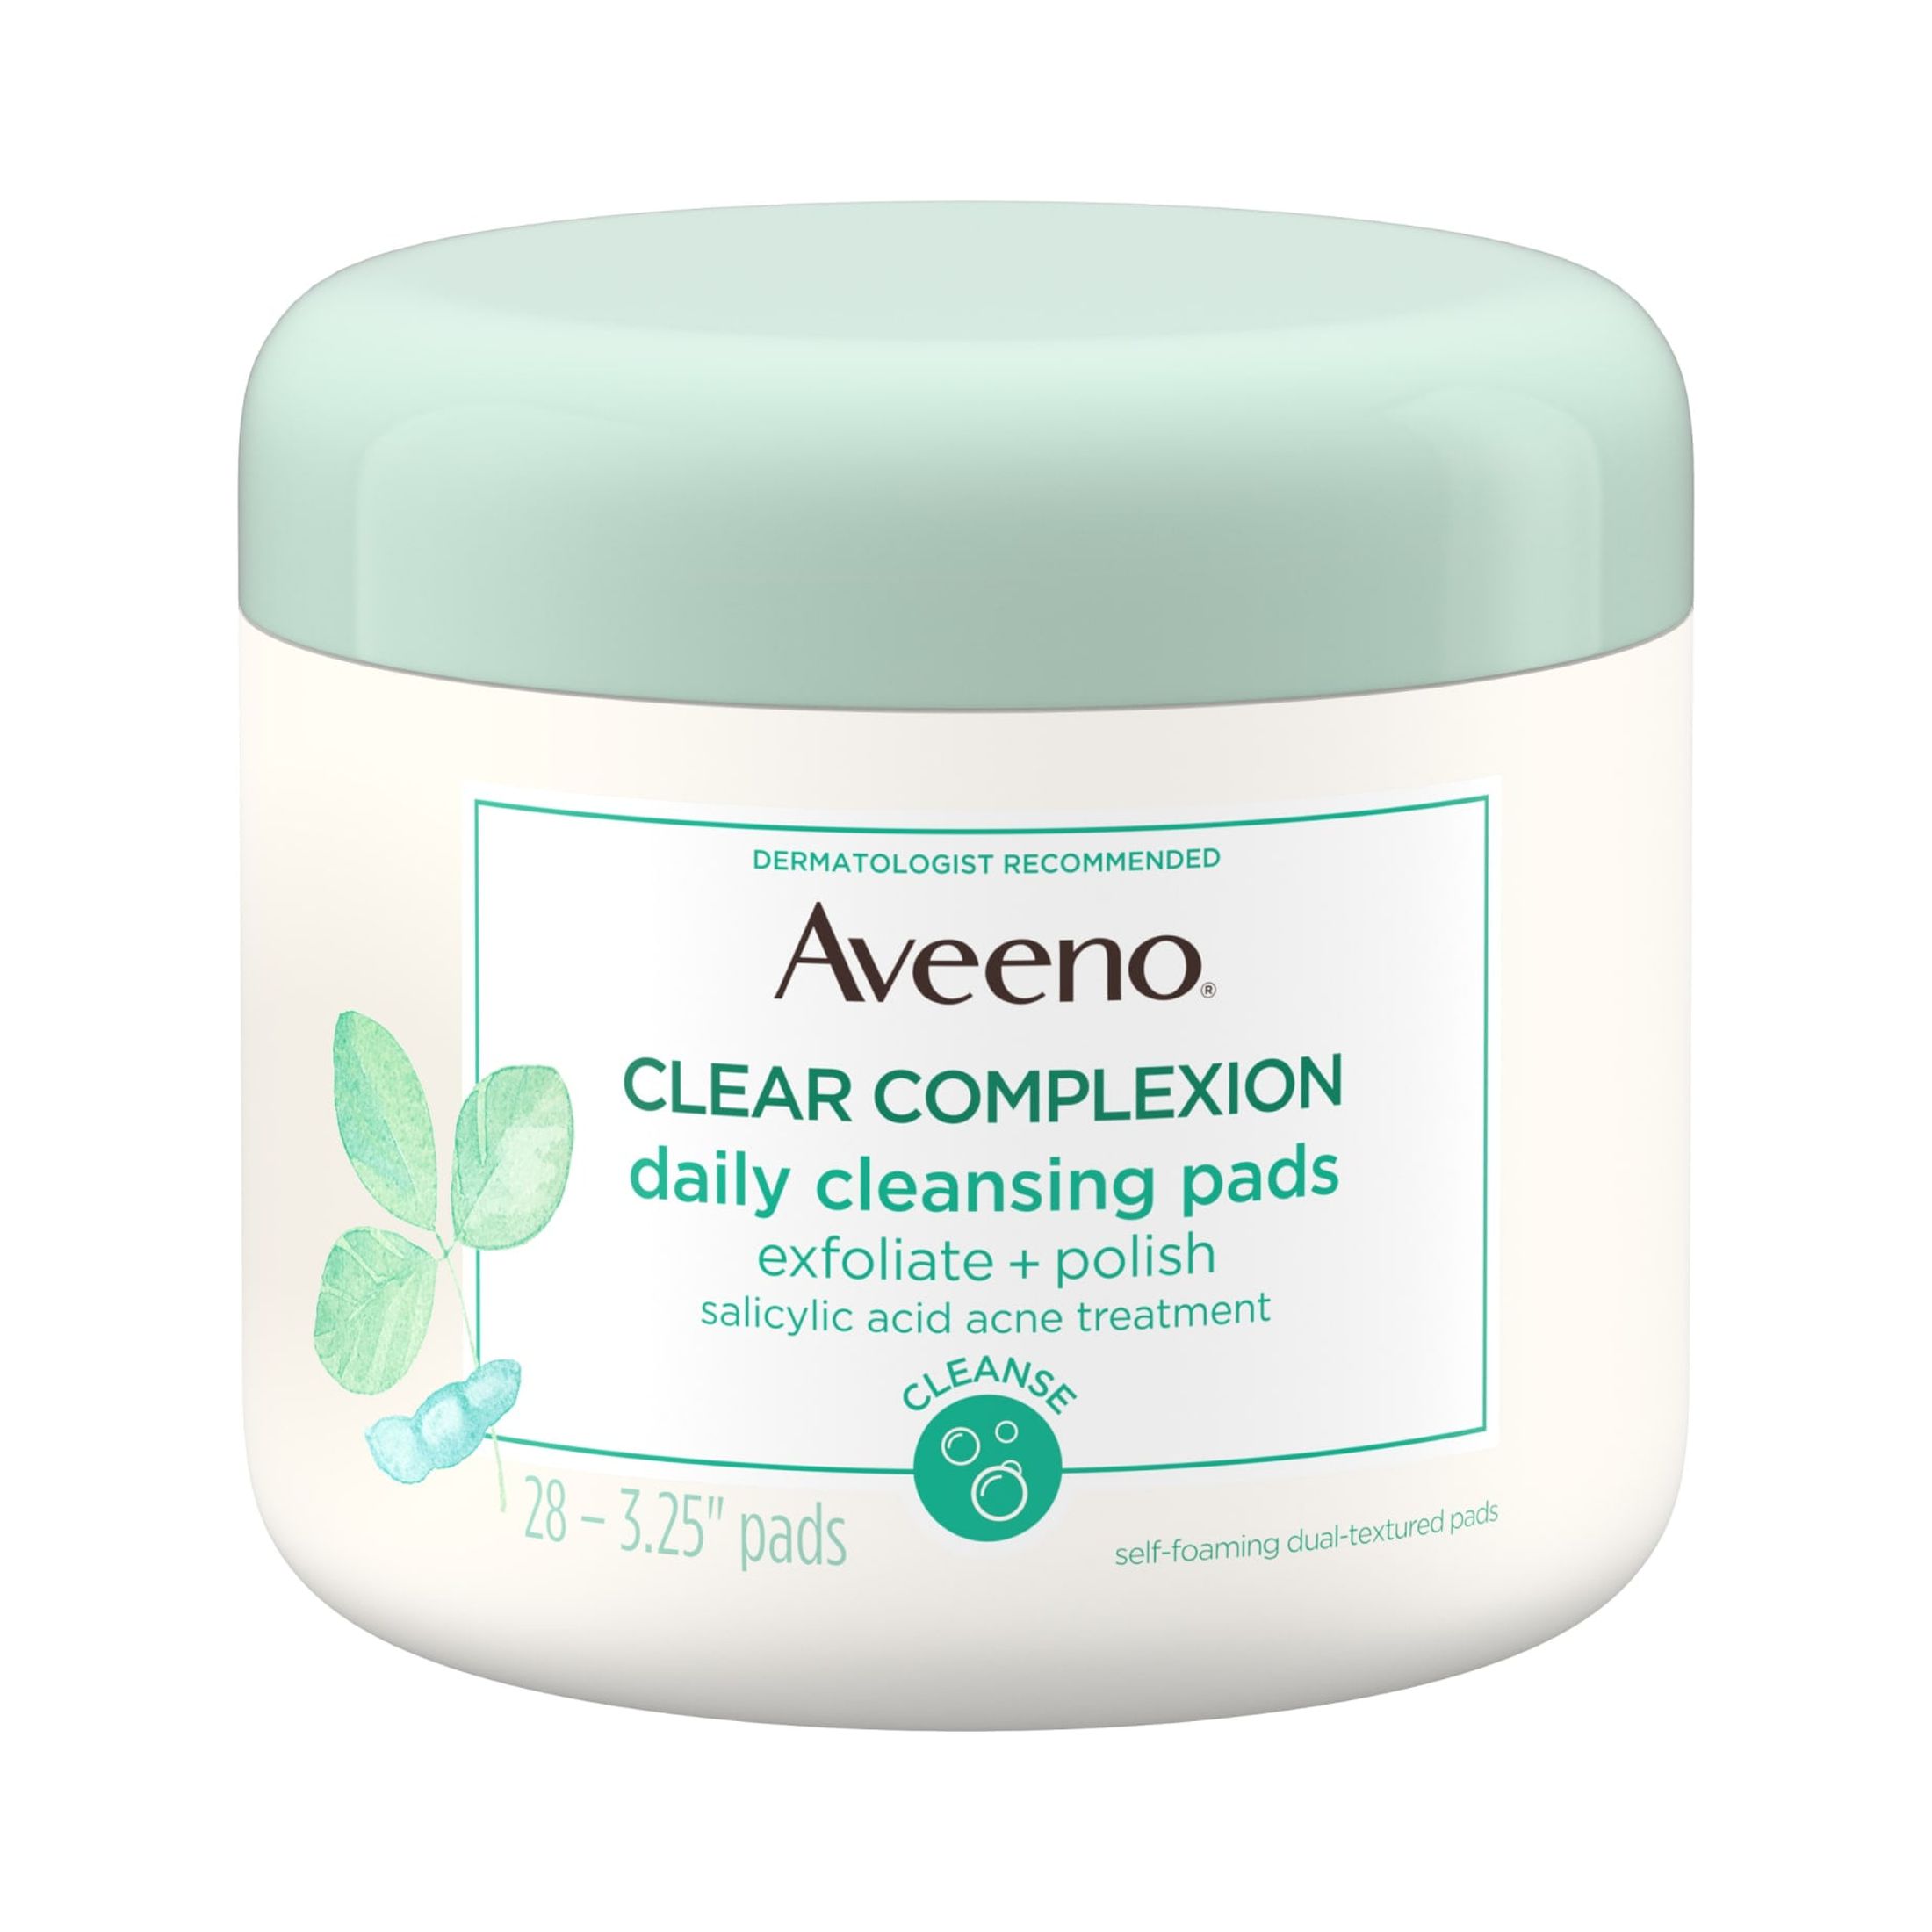 Aveeno Clear Complexion Acne Cleansing Pads, Salicylic Acid, 28 ct - image 1 of 8